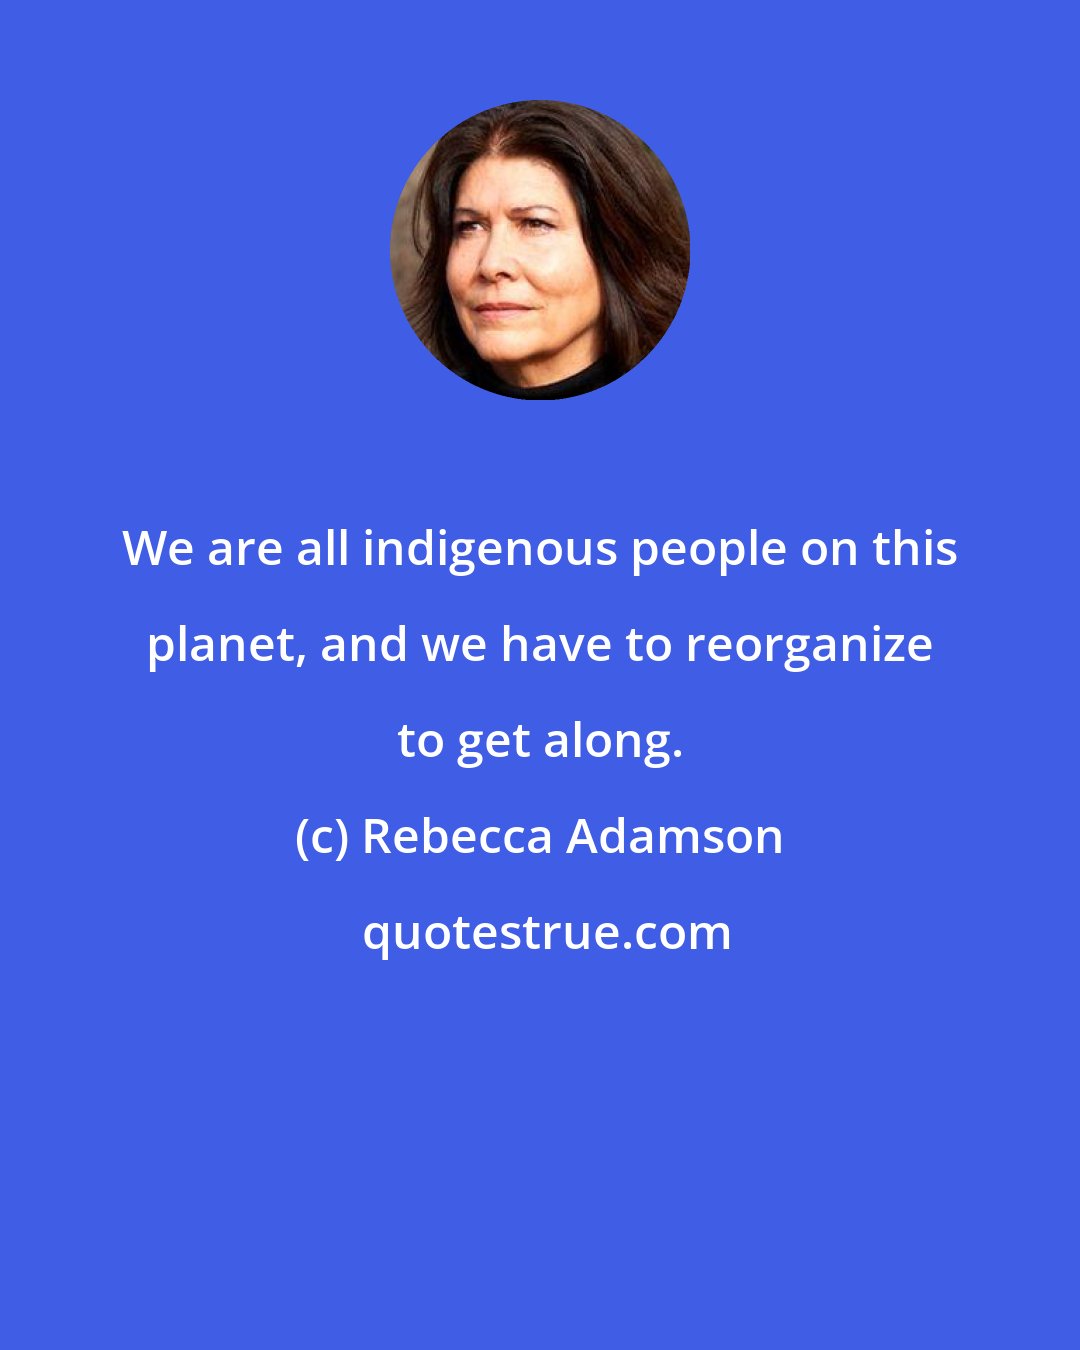 Rebecca Adamson: We are all indigenous people on this planet, and we have to reorganize to get along.